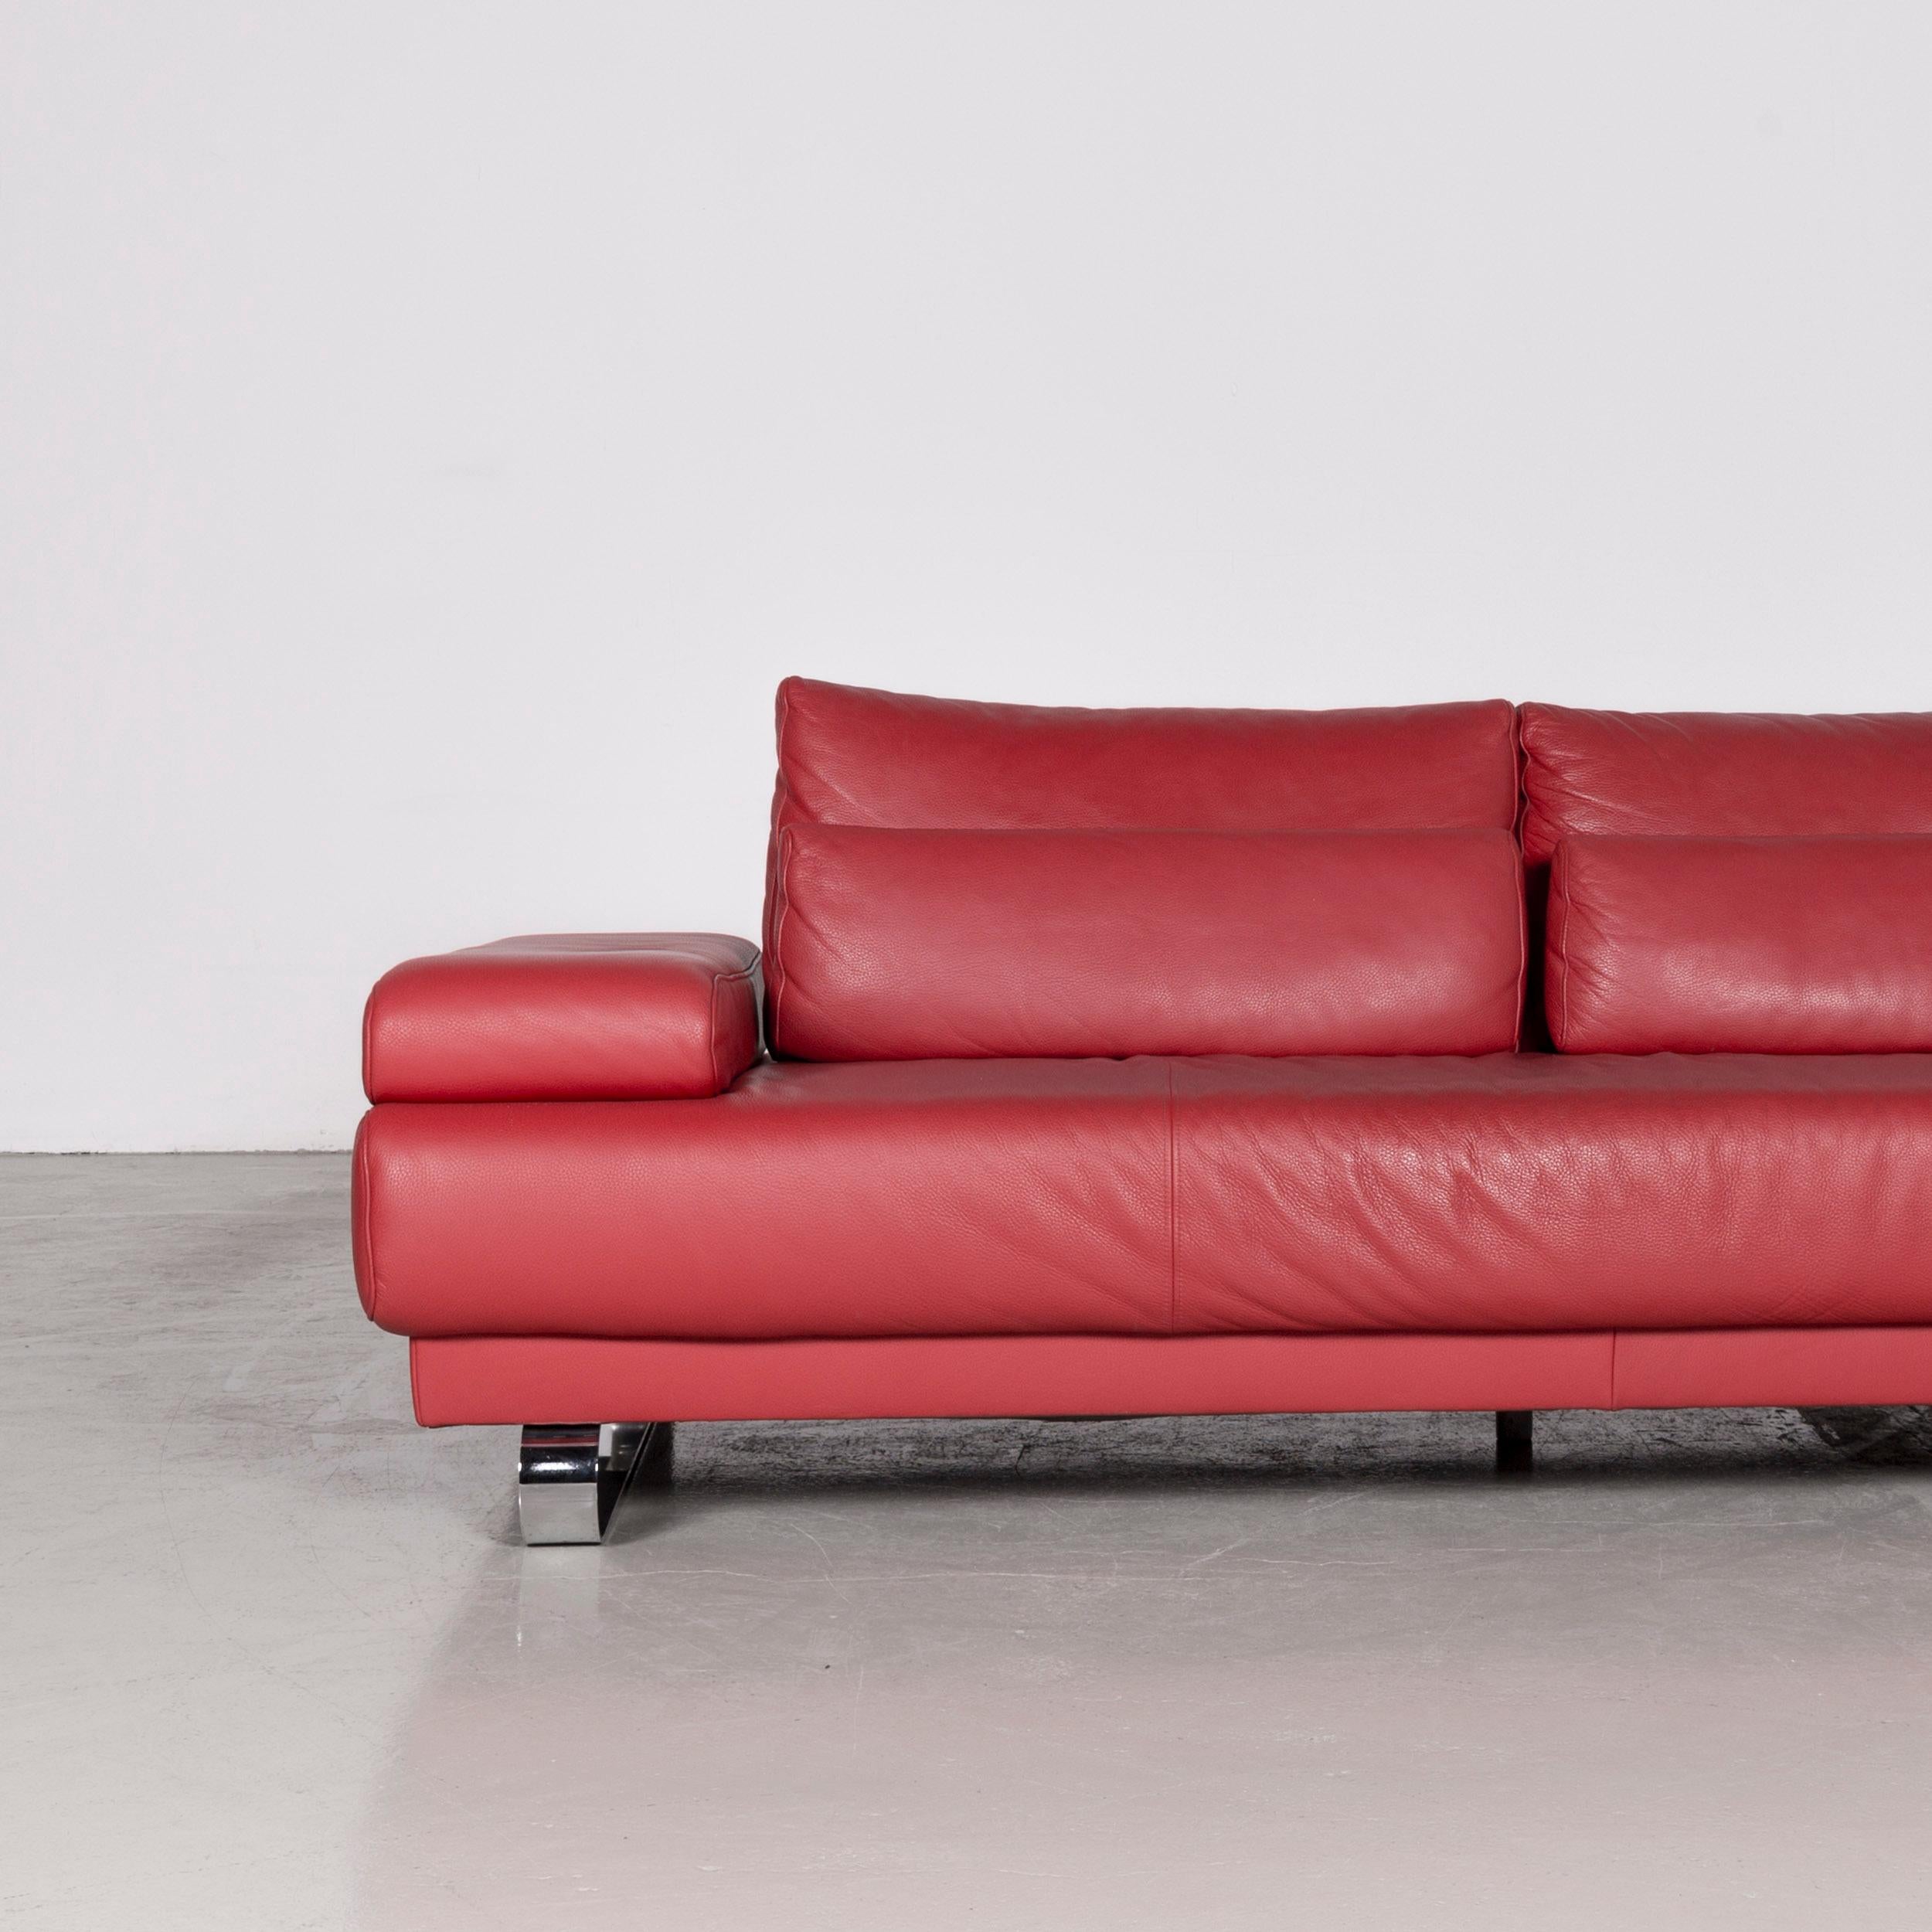 Contemporary Ewald Schillig Harry Designer Sofa Leather Red Three-Seat Couch For Sale